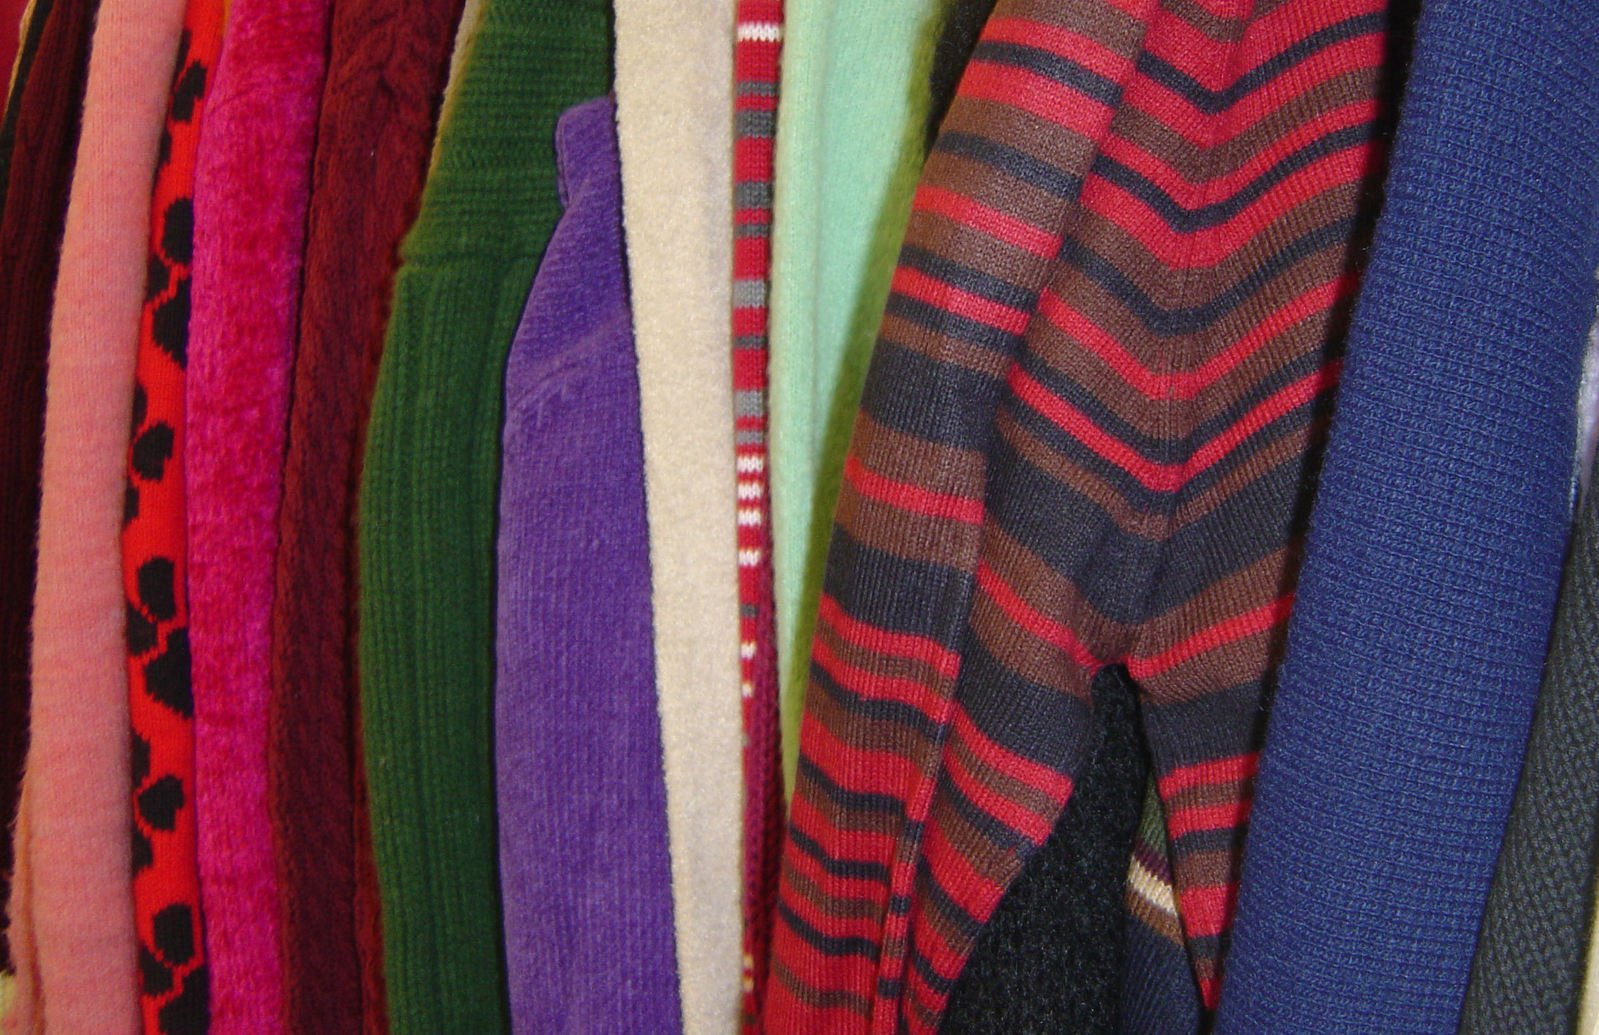 several different colored sweaters are lined up together